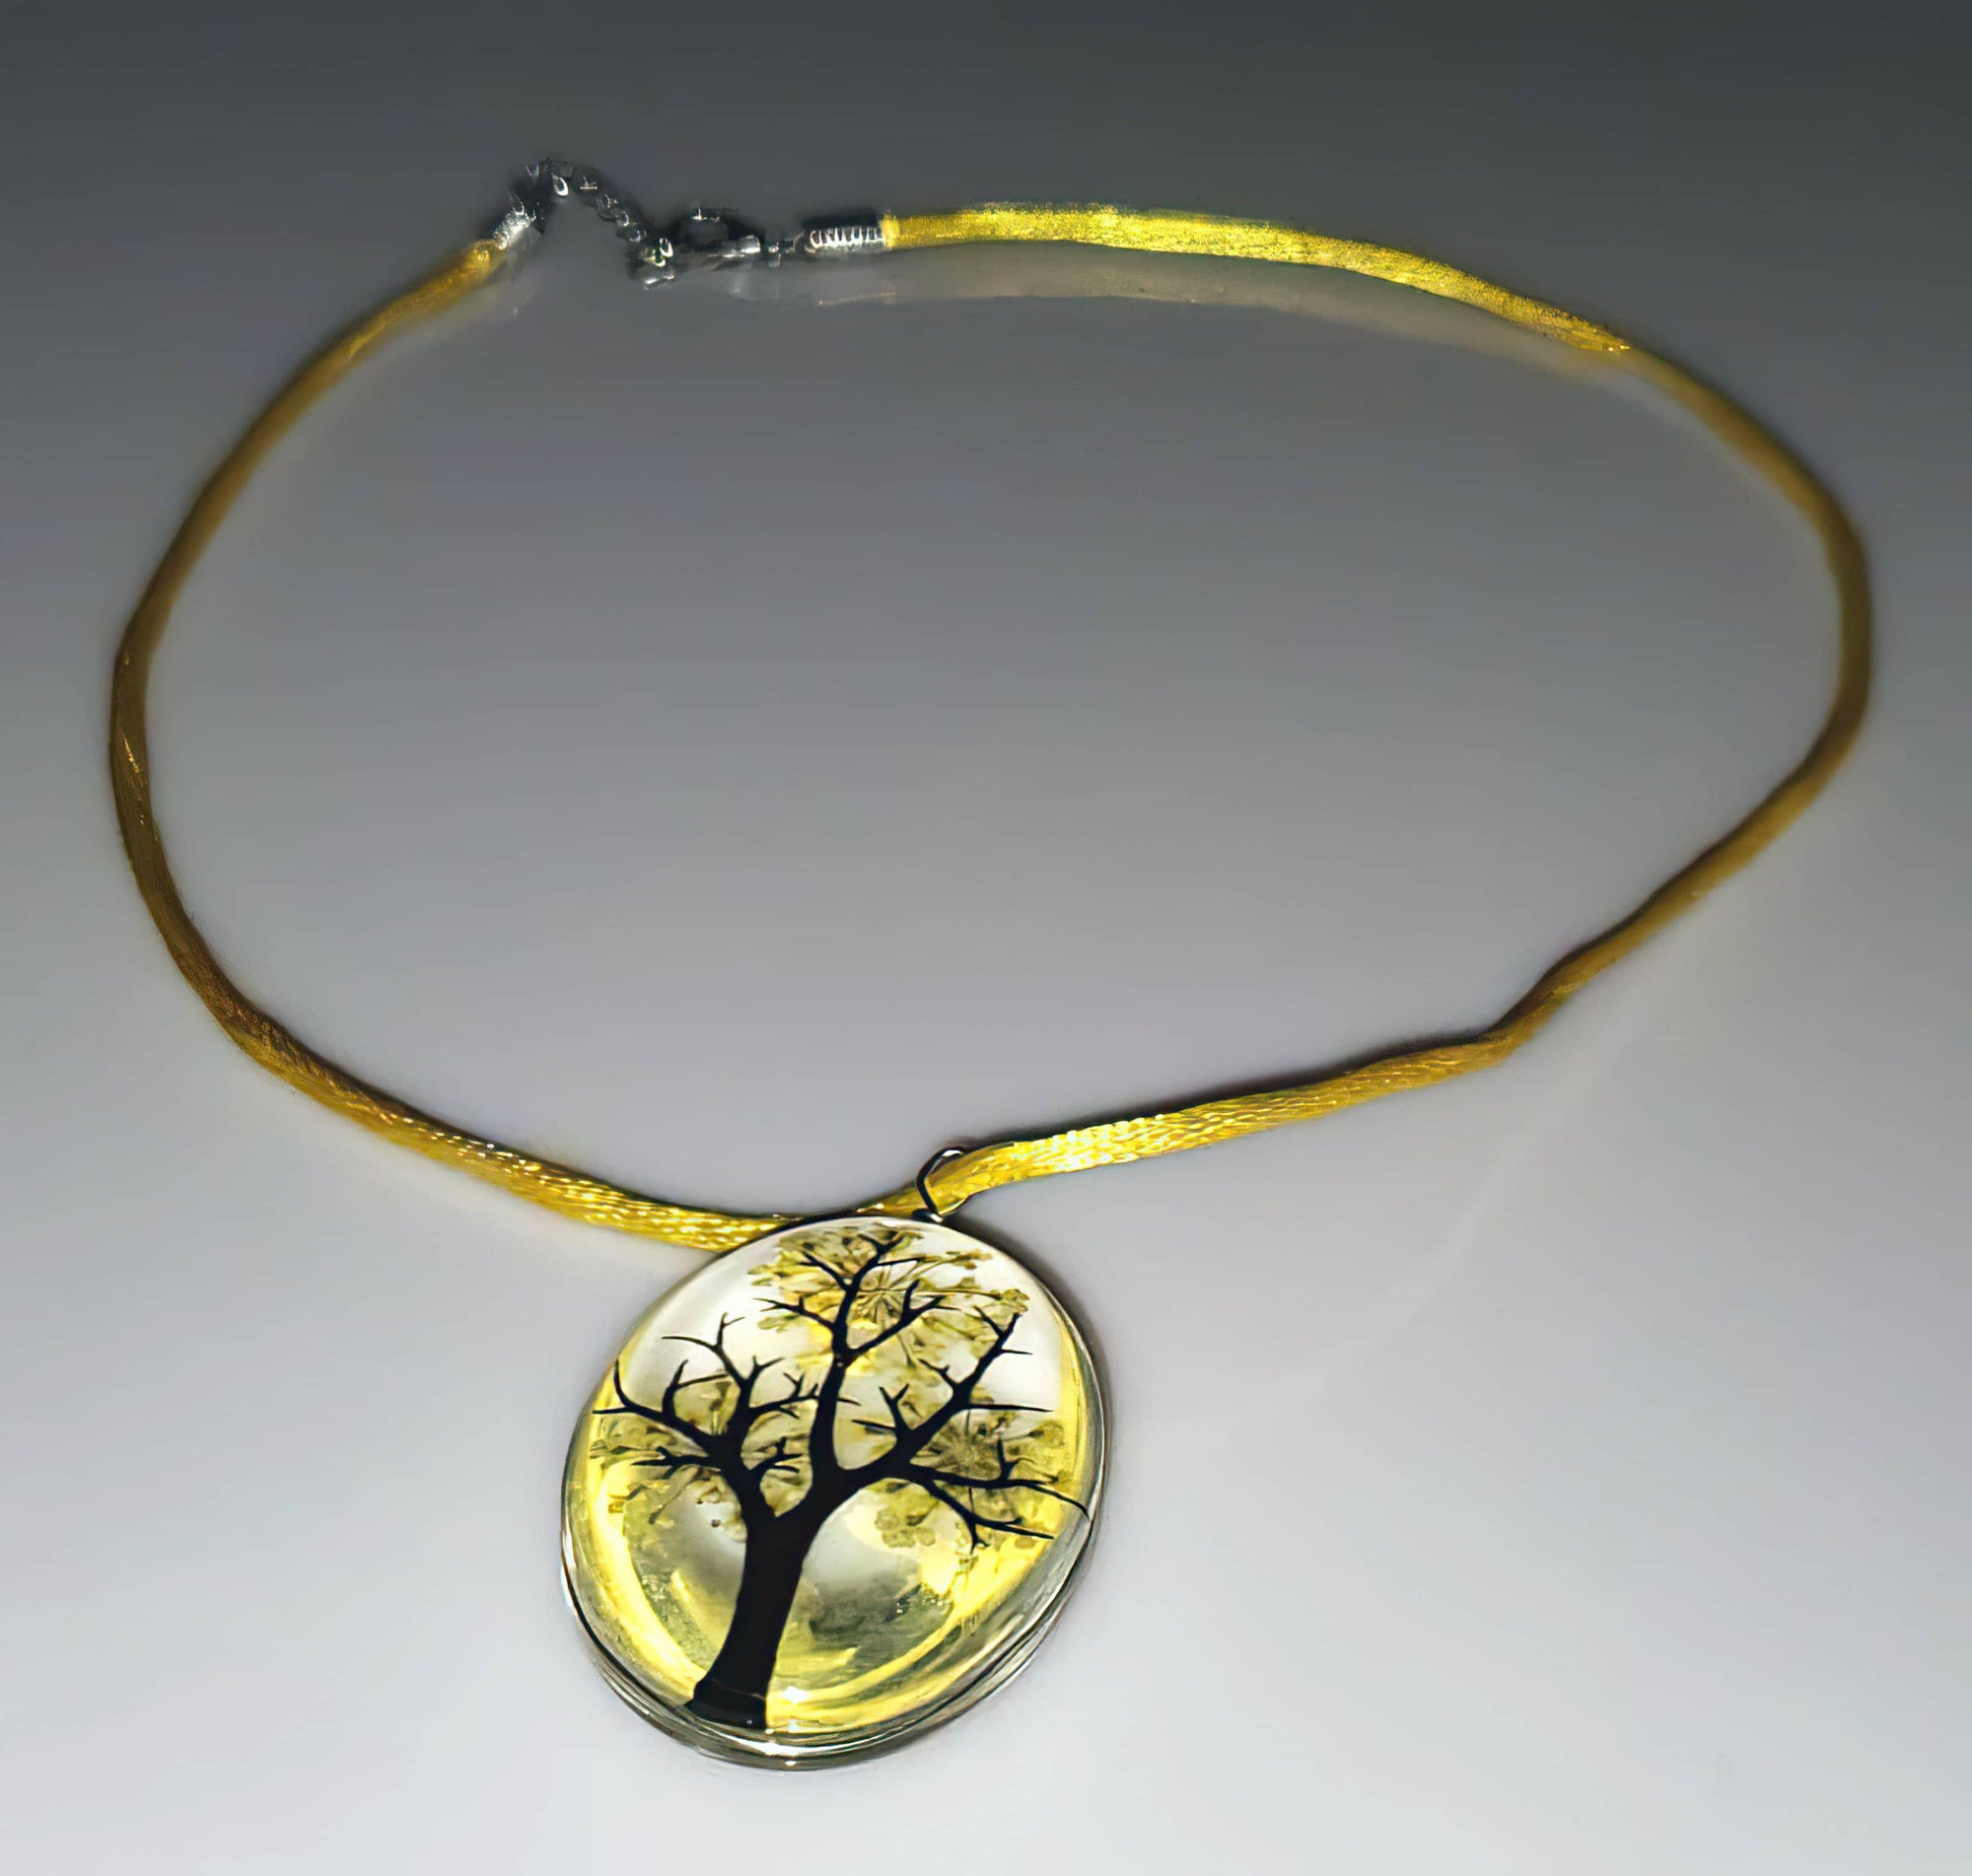 Tree of Life Dried Flower Glass Oval Terrarium Necklace in Yellow (4397948731486)